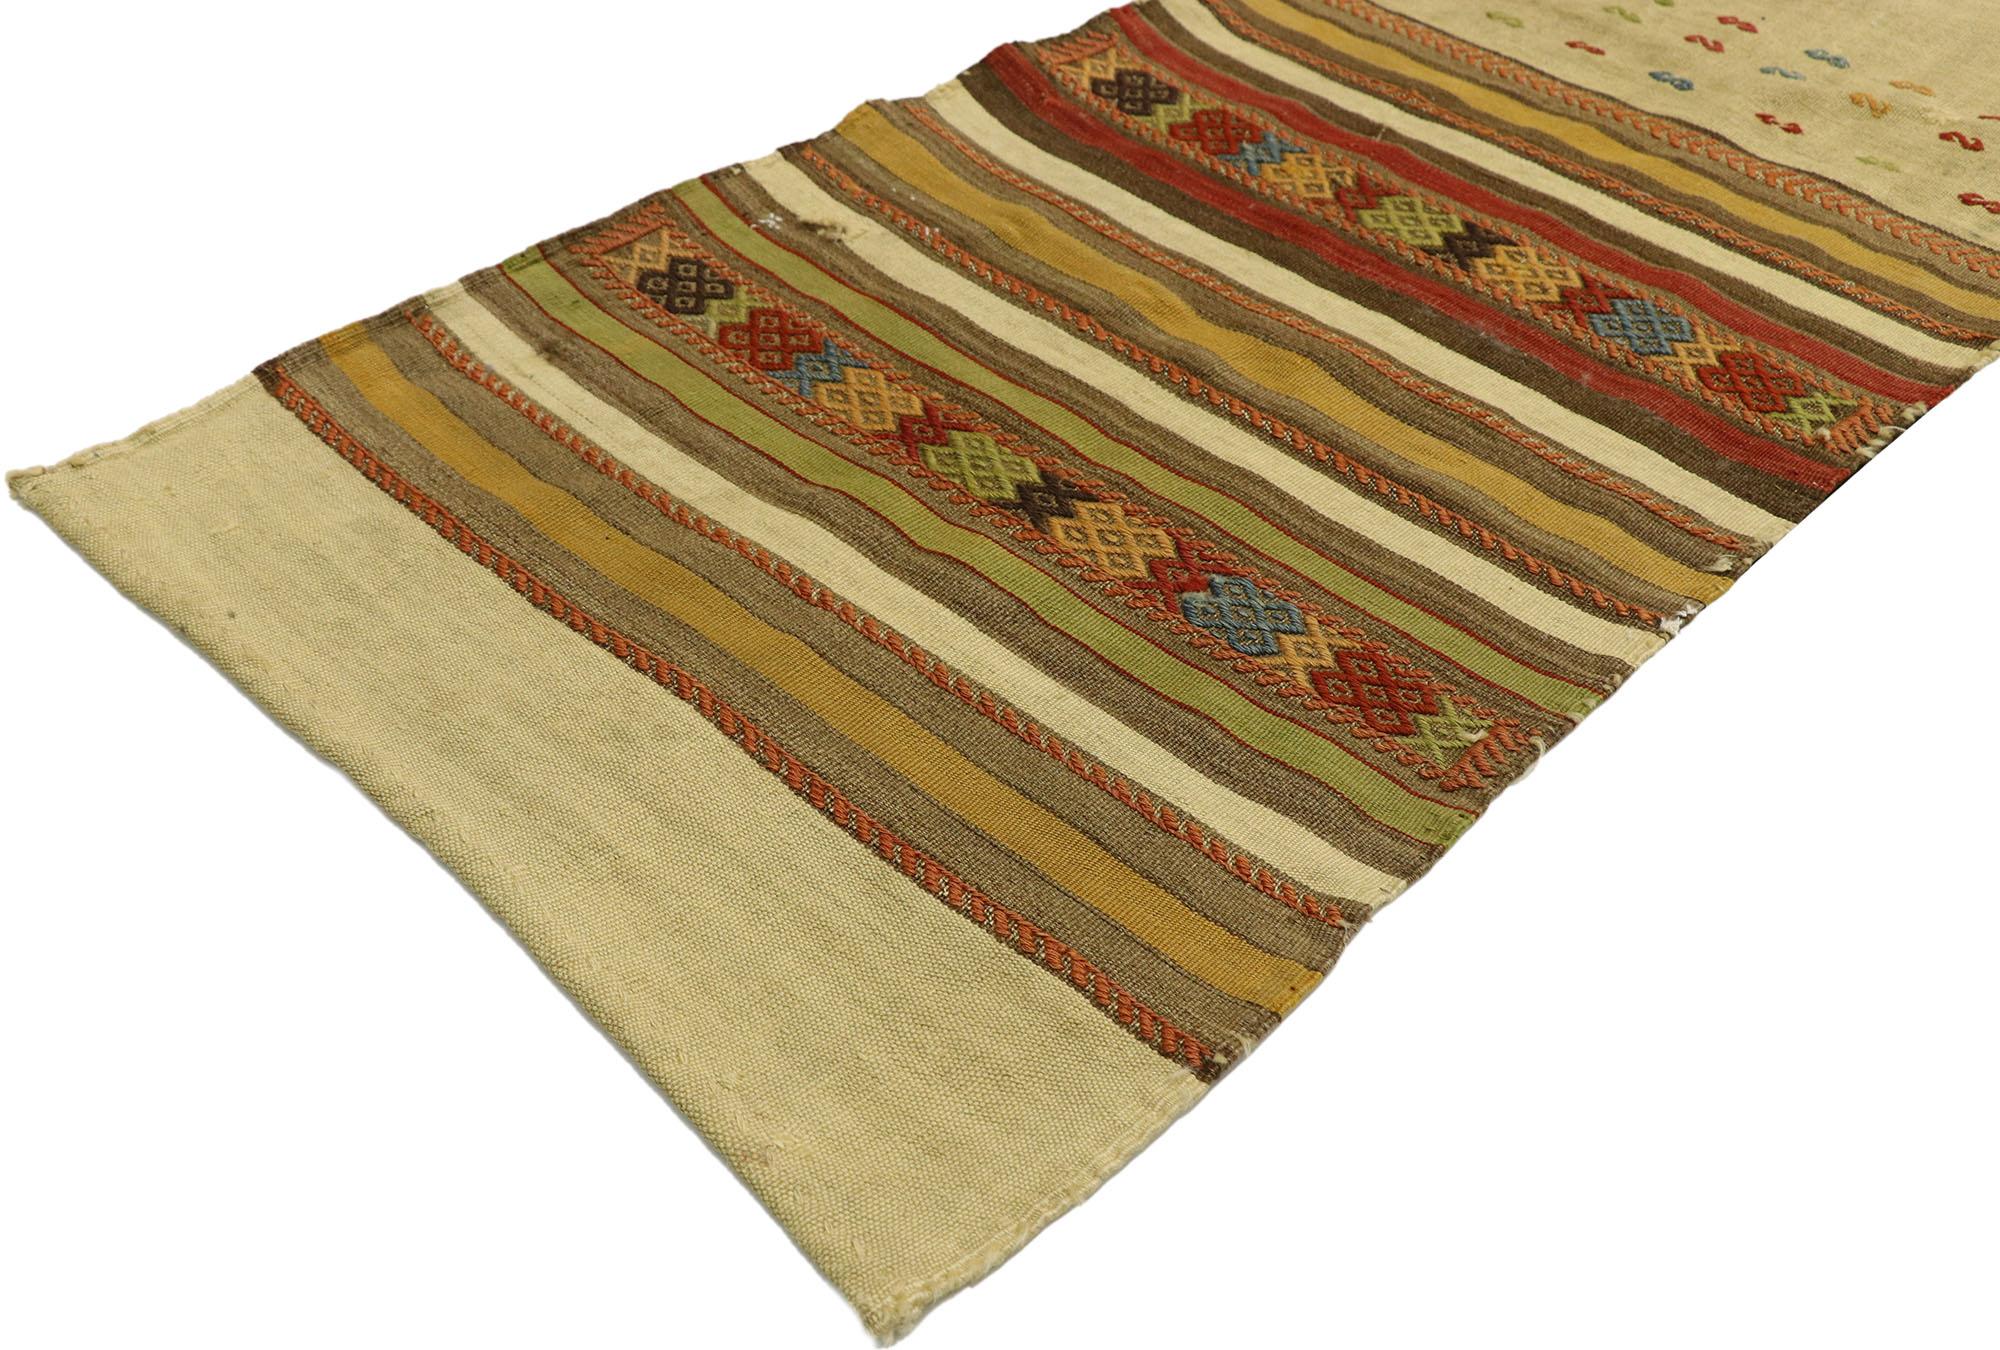 Hand-Woven Distressed Vintage Turkish Kilim Runner with Rustic Southwestern Desert Style